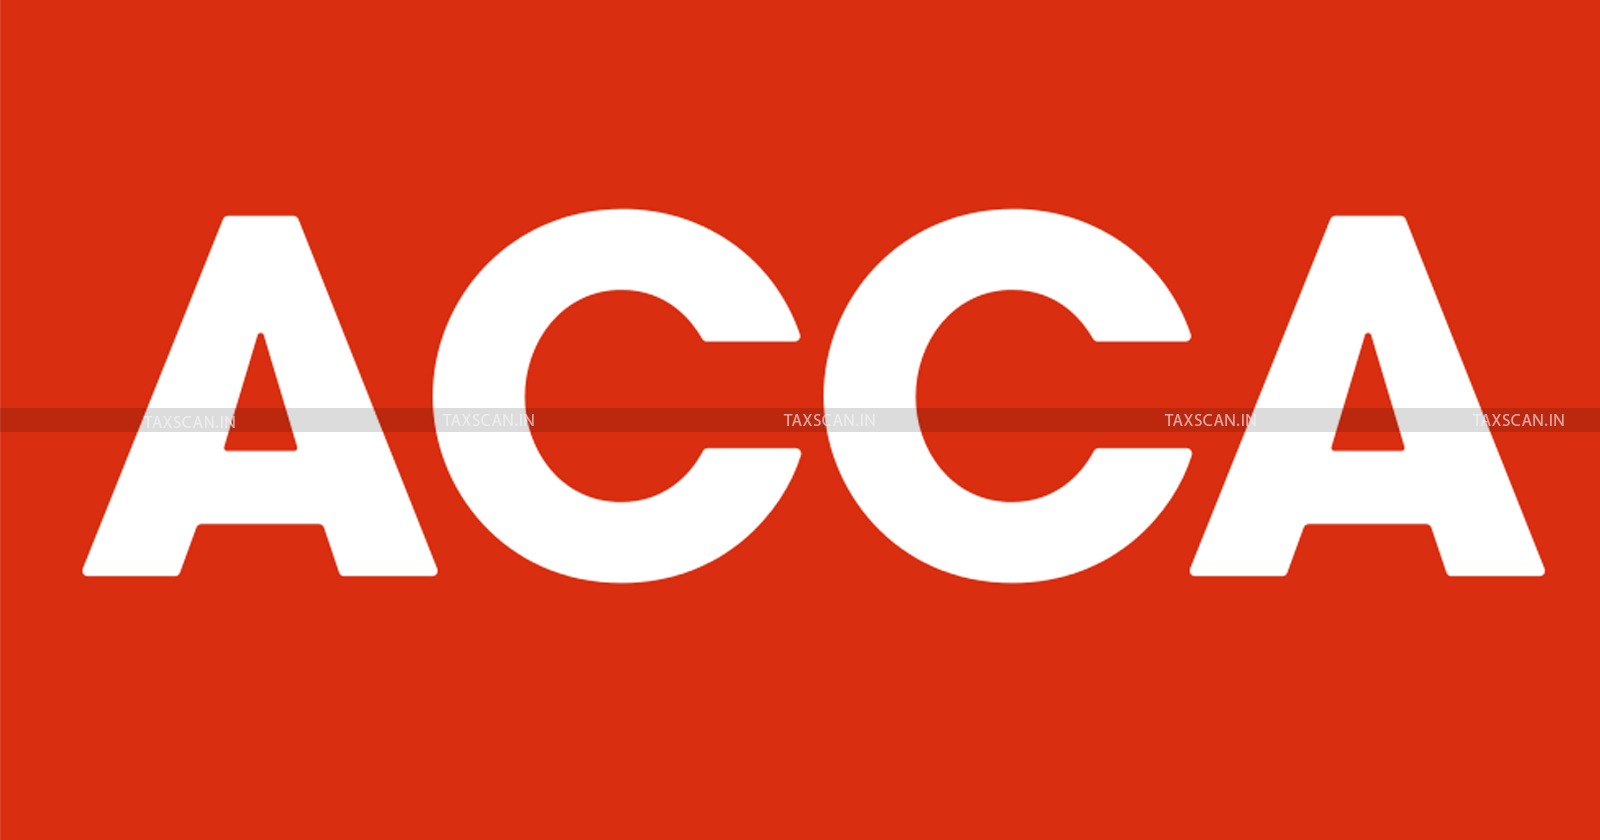 ACCA - Accountancy Professionals - ACCA report on accountancy professionals - Financial professionals survey - ACCA Survey - Taxscan